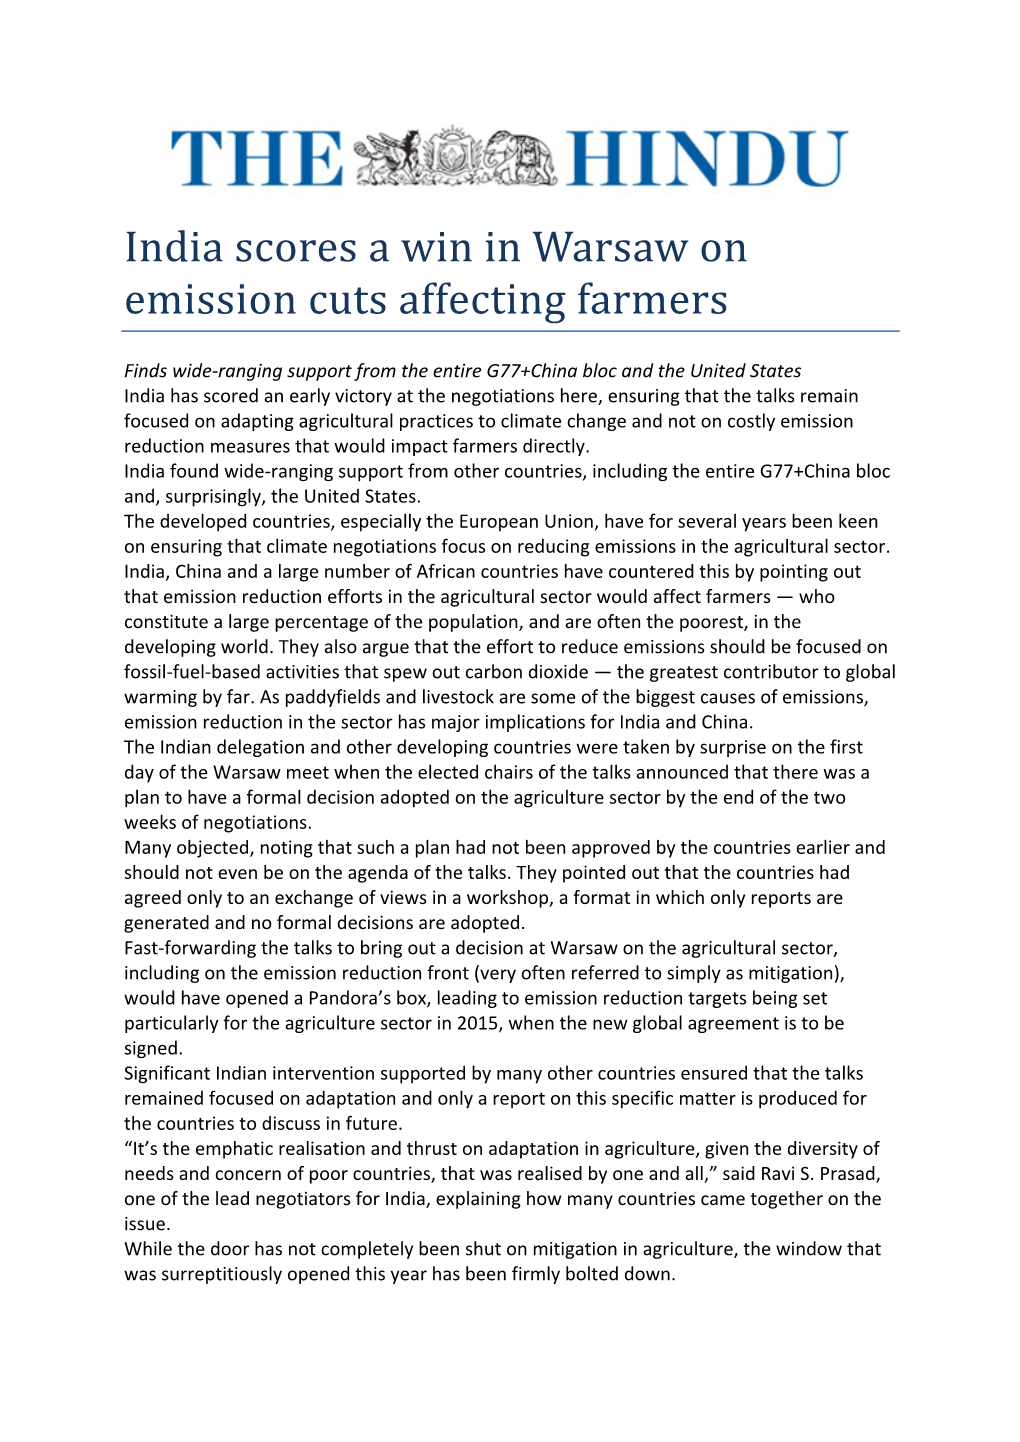 India Scores a Win in Warsaw on Emission Cuts Affecting Farmers